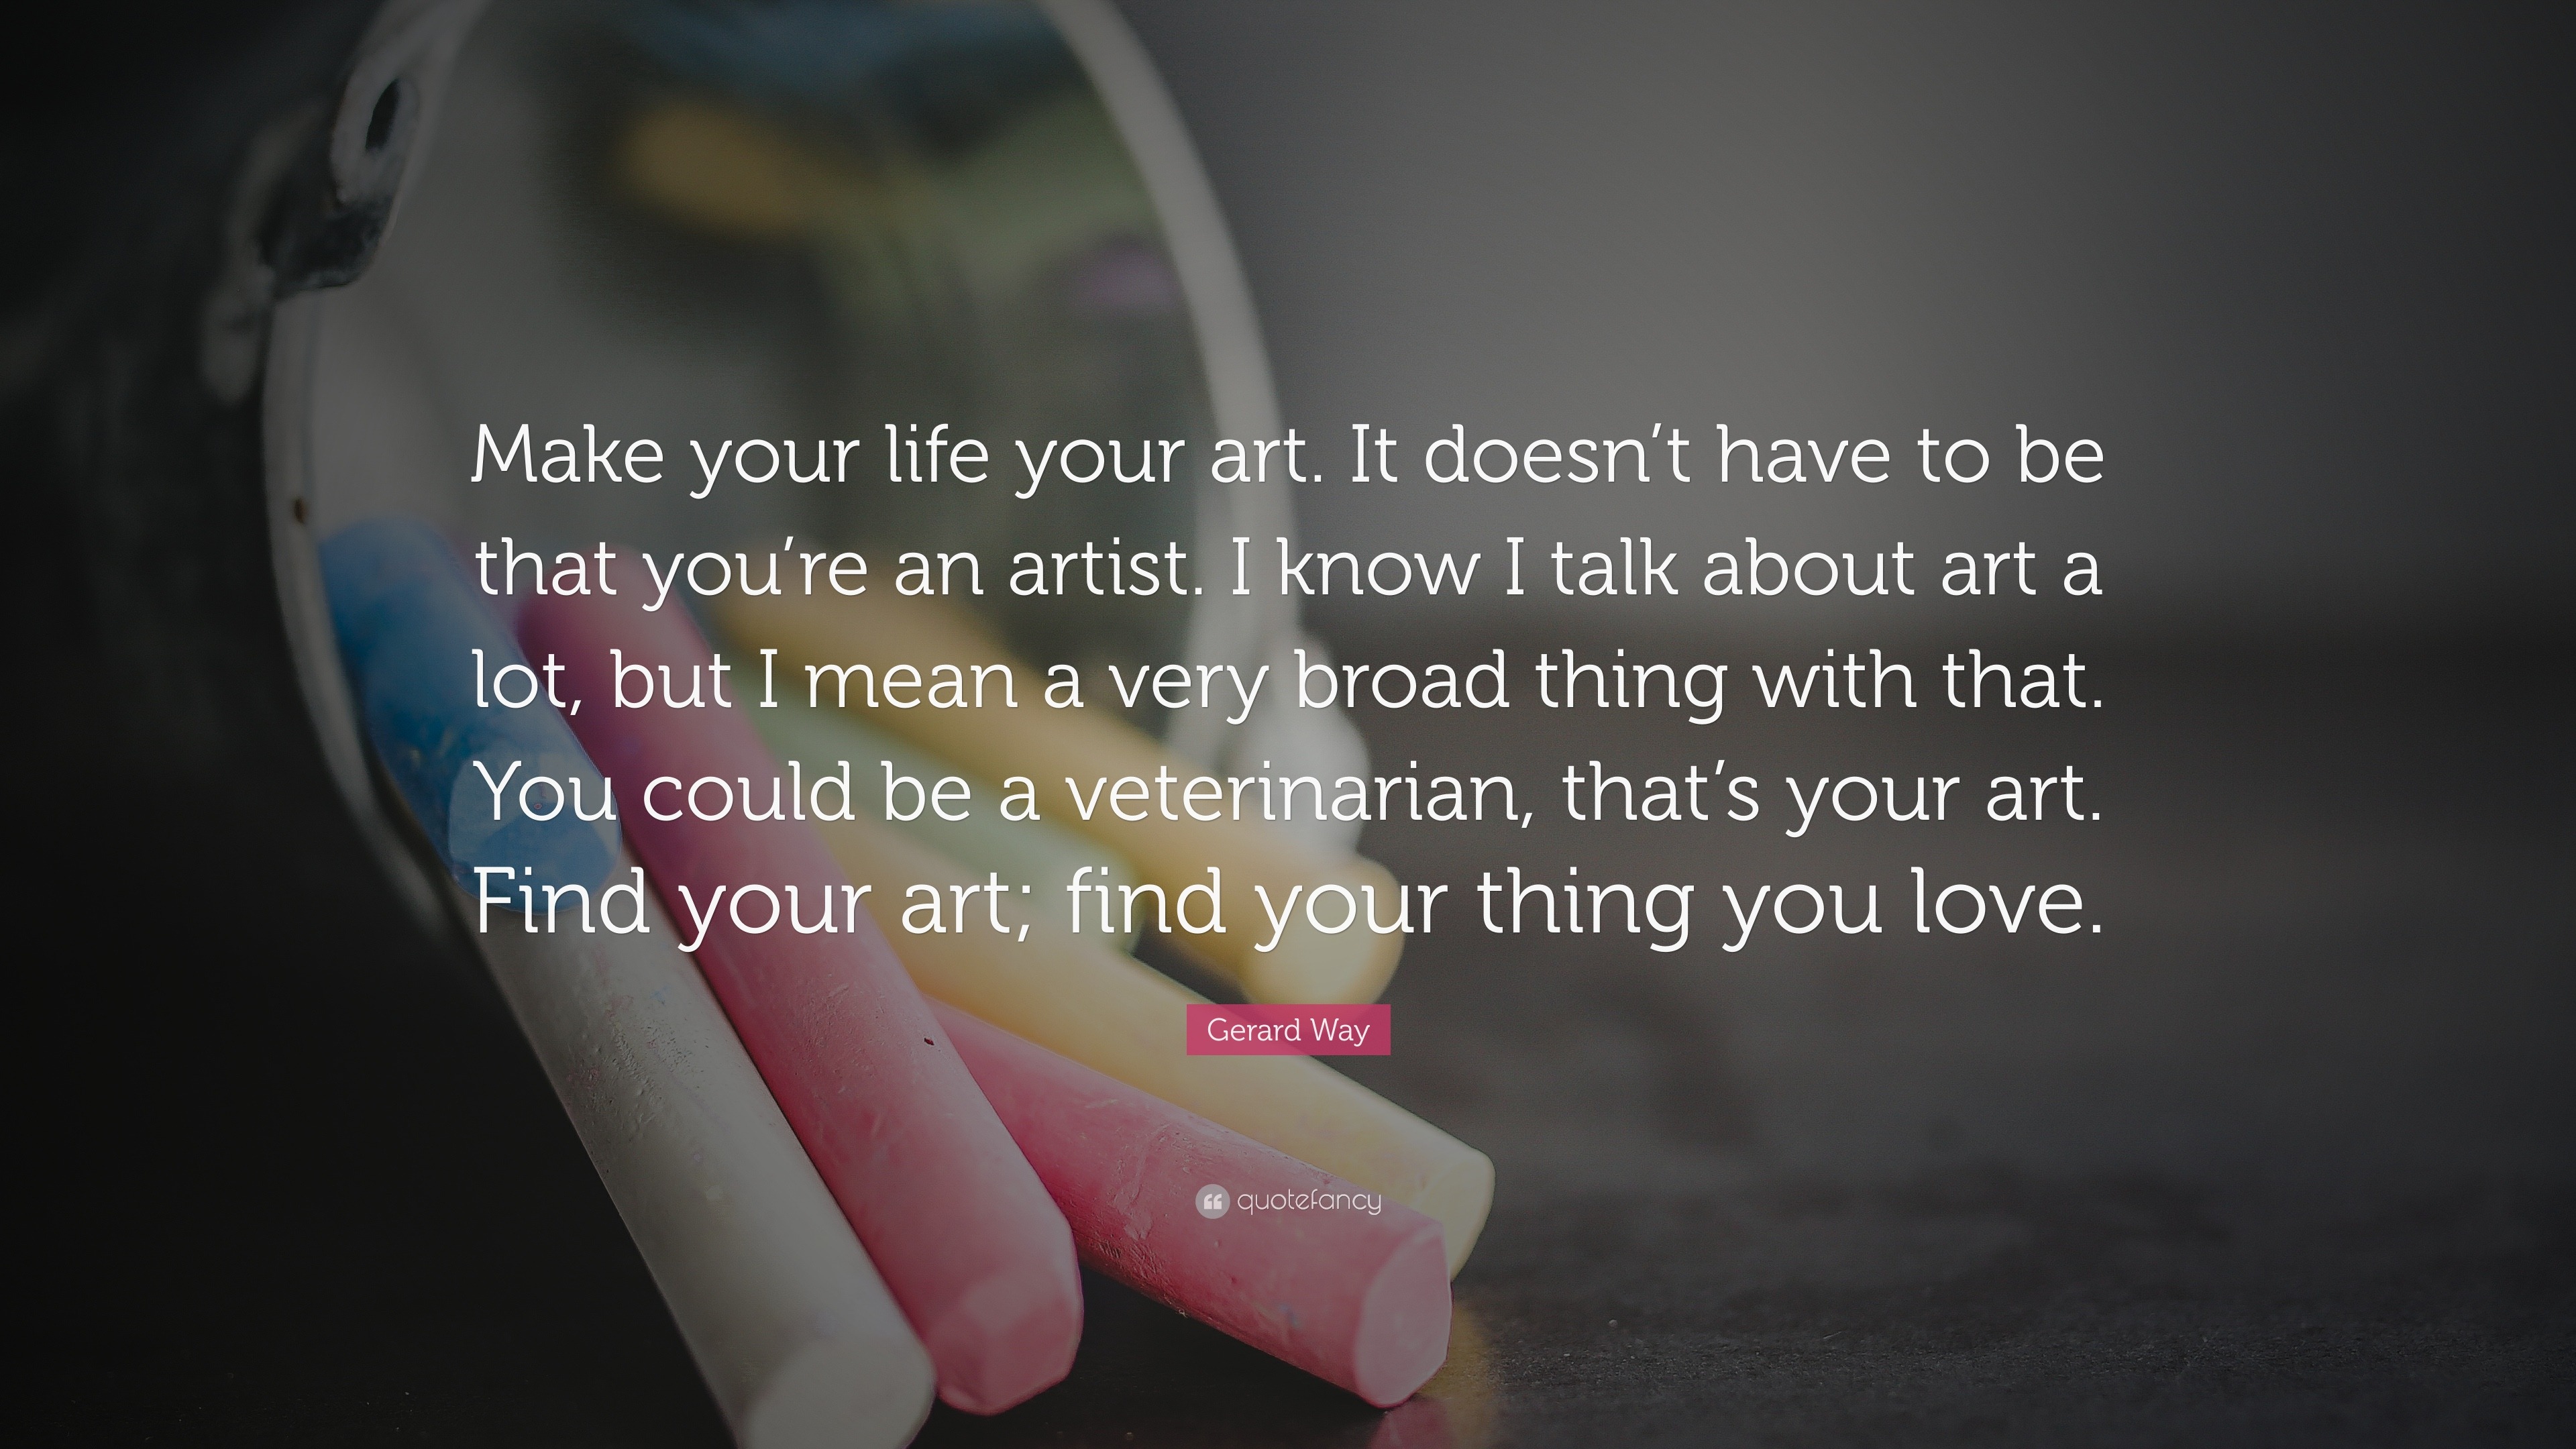 Gerard Way Quote “make Your Life Your Art It Doesnt Have To Be That Youre An Artist I Know